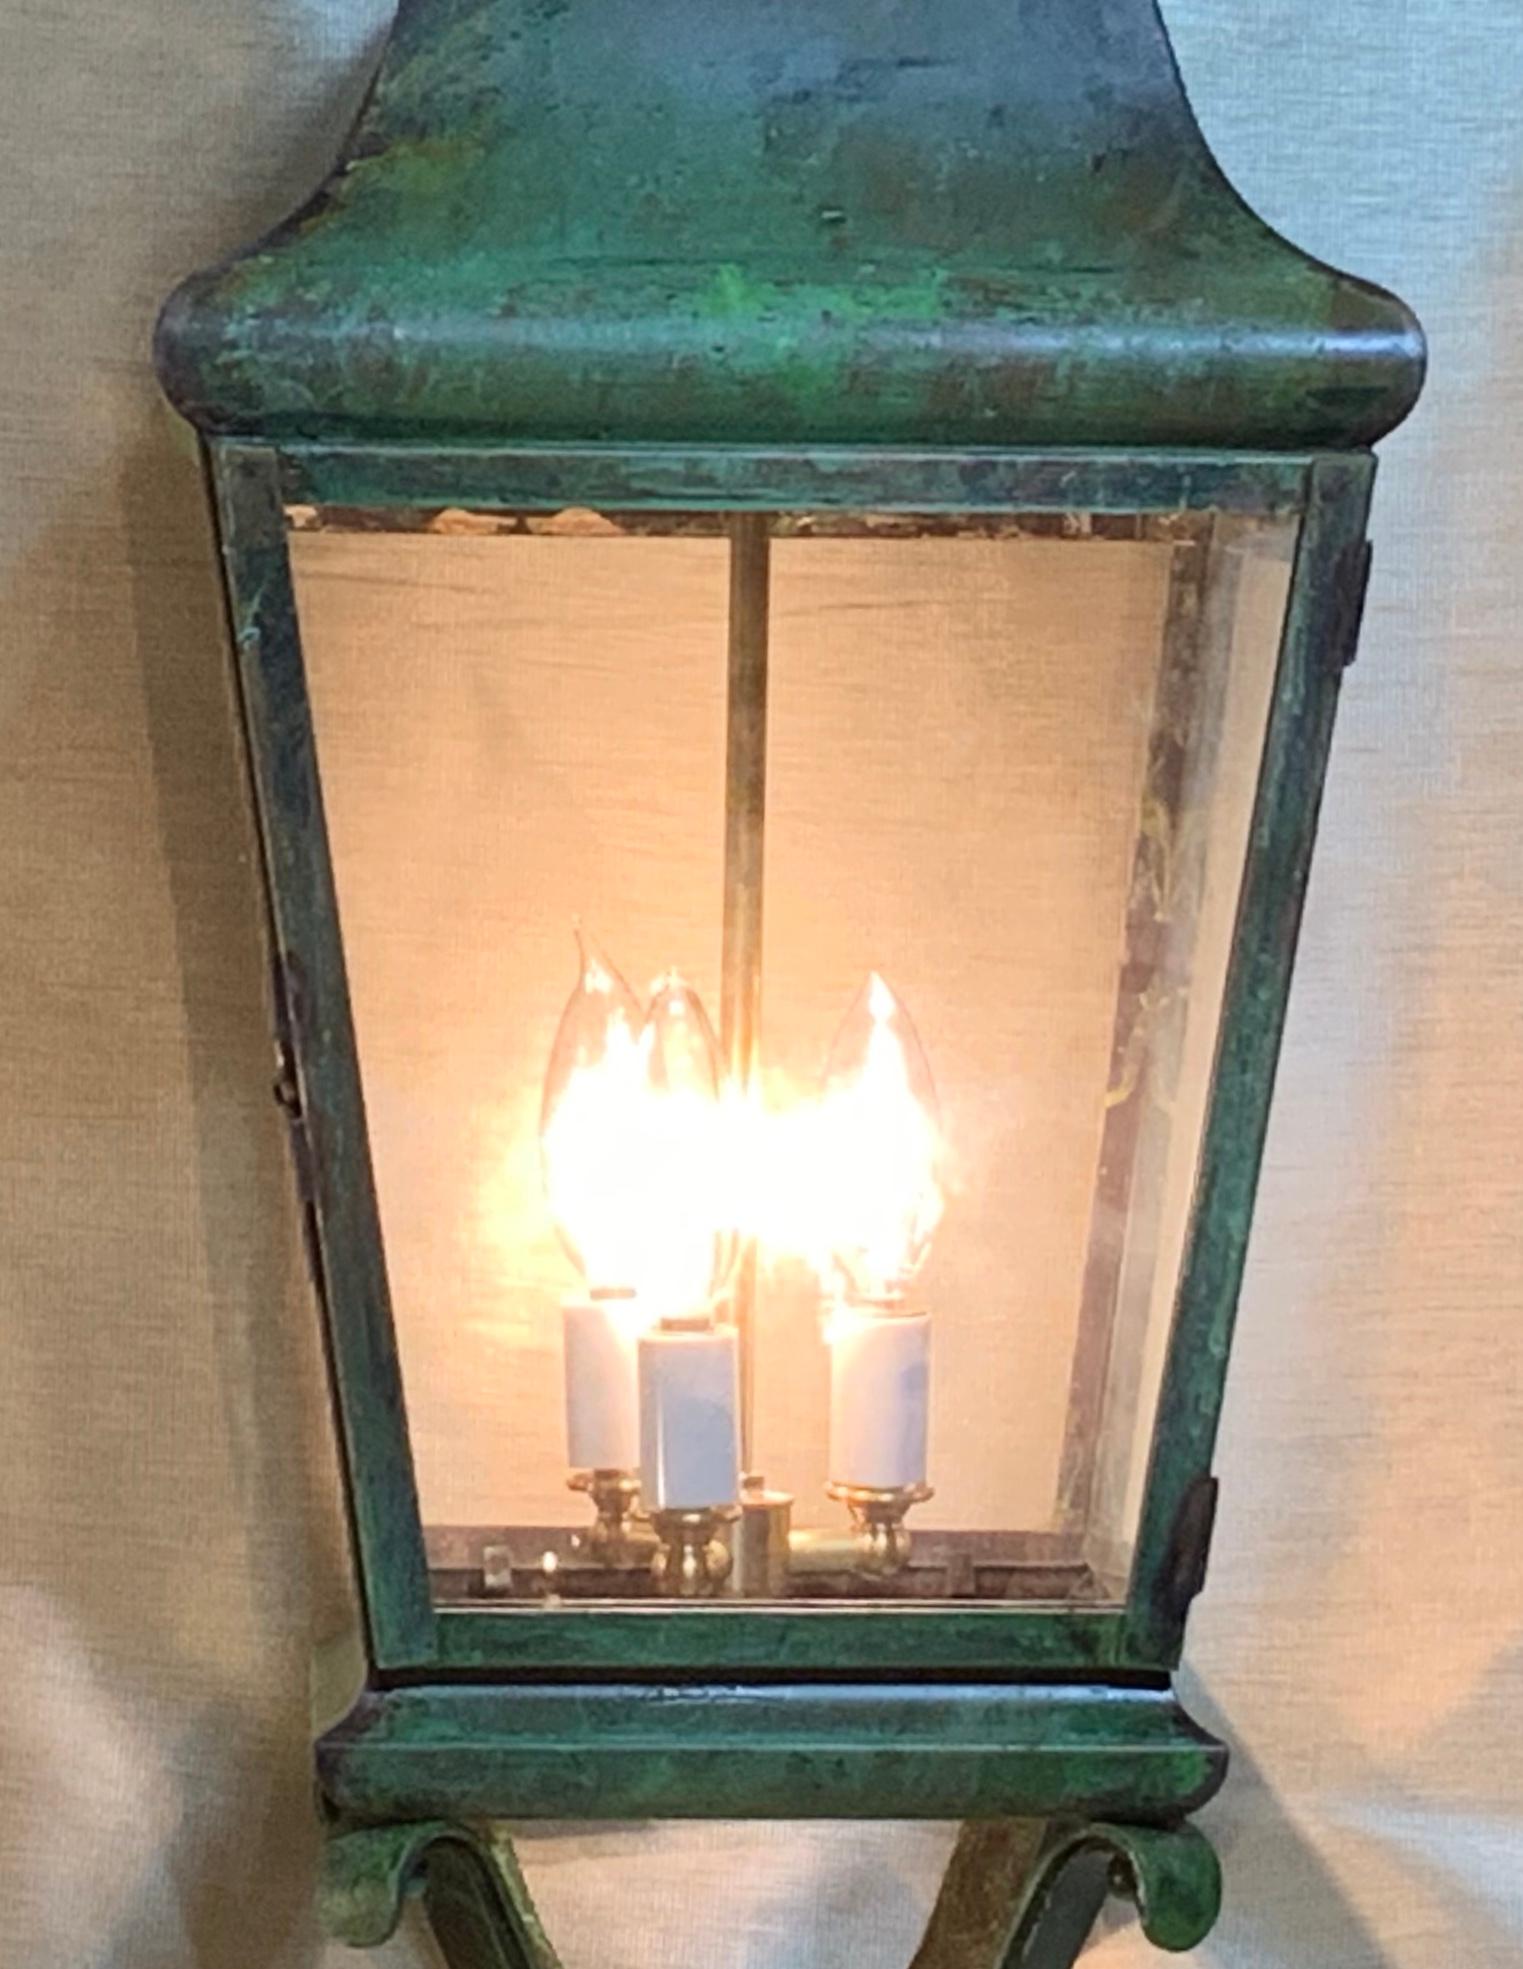 Elegant hanging lantern made of solid brass with three 60/watt lights, suitable for wet locations ready to use